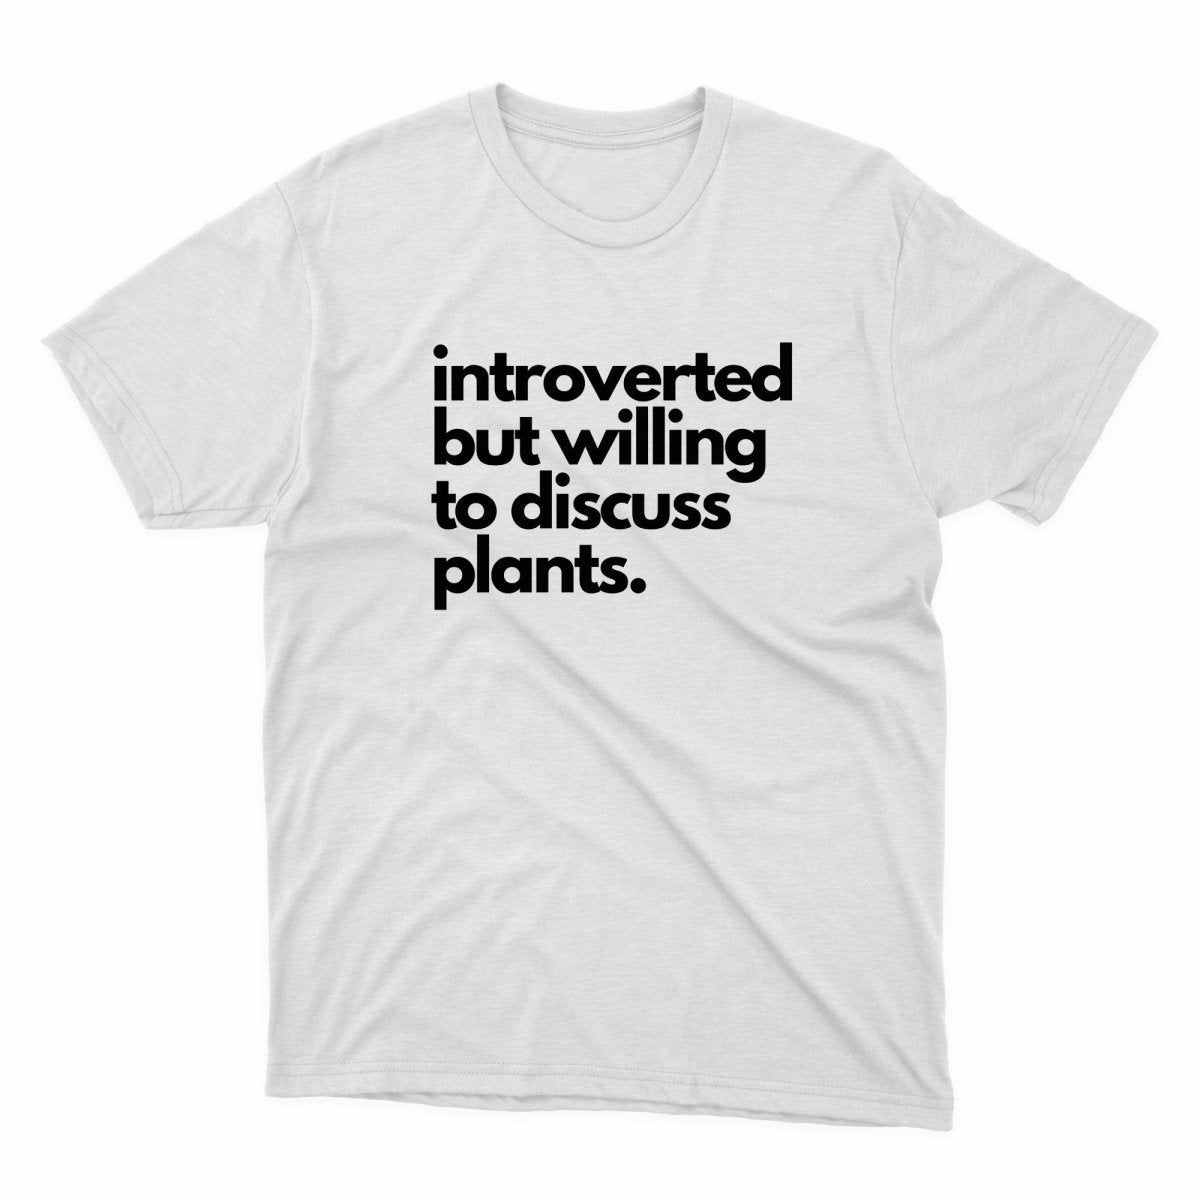 Introverted But Willing To Discuss Plants Shirt - stickerbullIntroverted But Willing To Discuss Plants ShirtShirtsPrintifystickerbull30453112303755270765WhiteSa white t - shirt with black text that says,'i'm interested